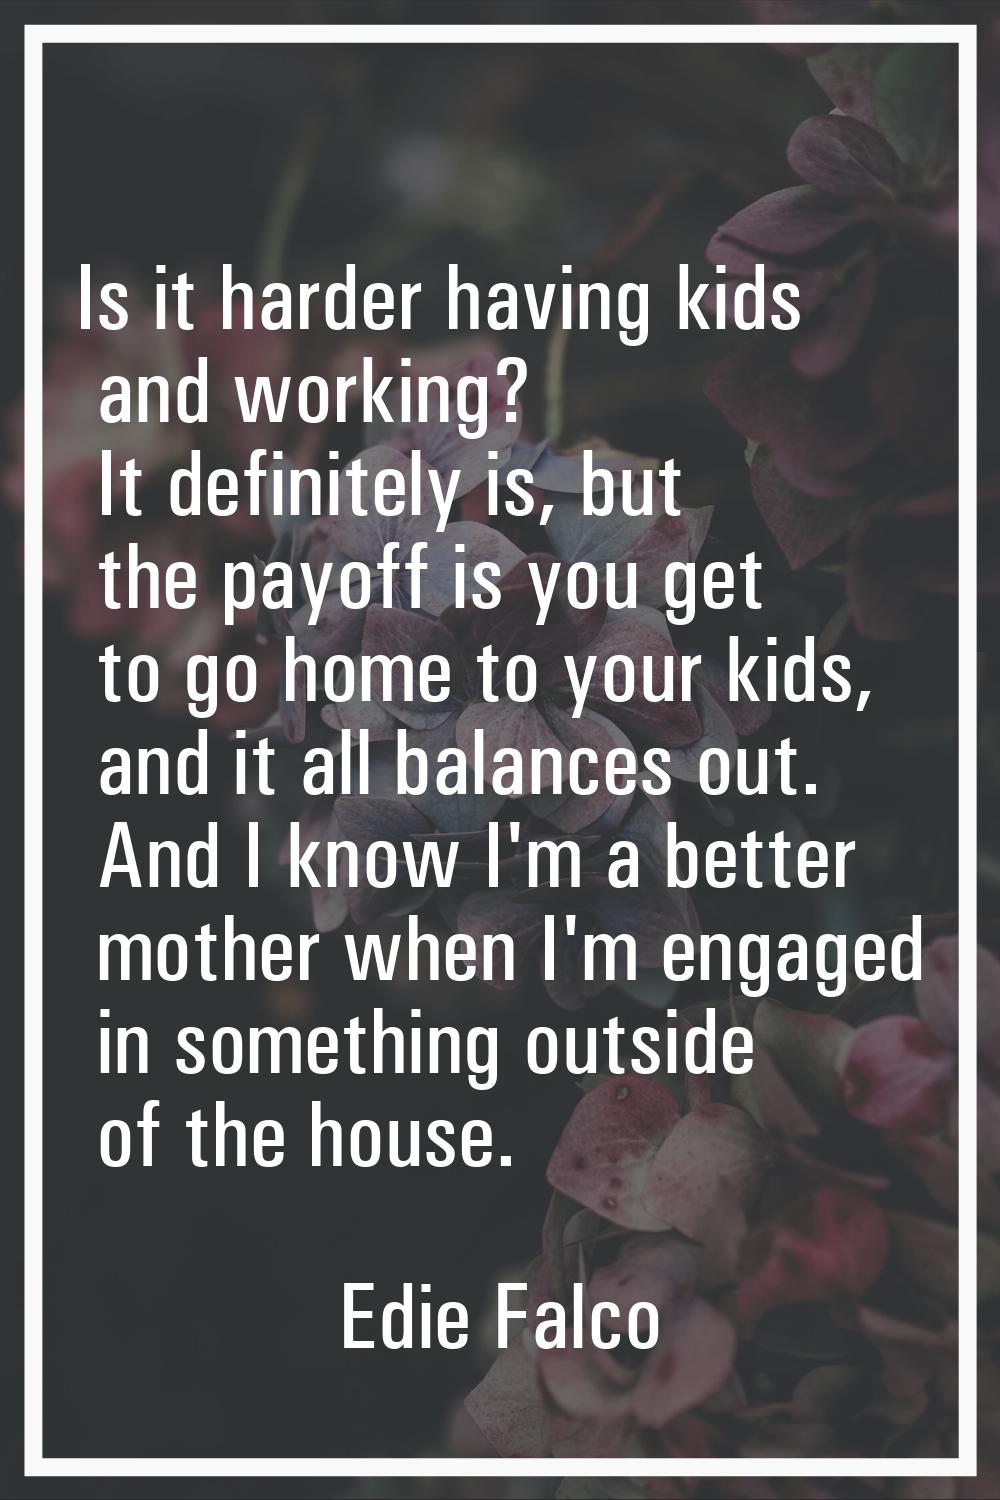 Is it harder having kids and working? It definitely is, but the payoff is you get to go home to you